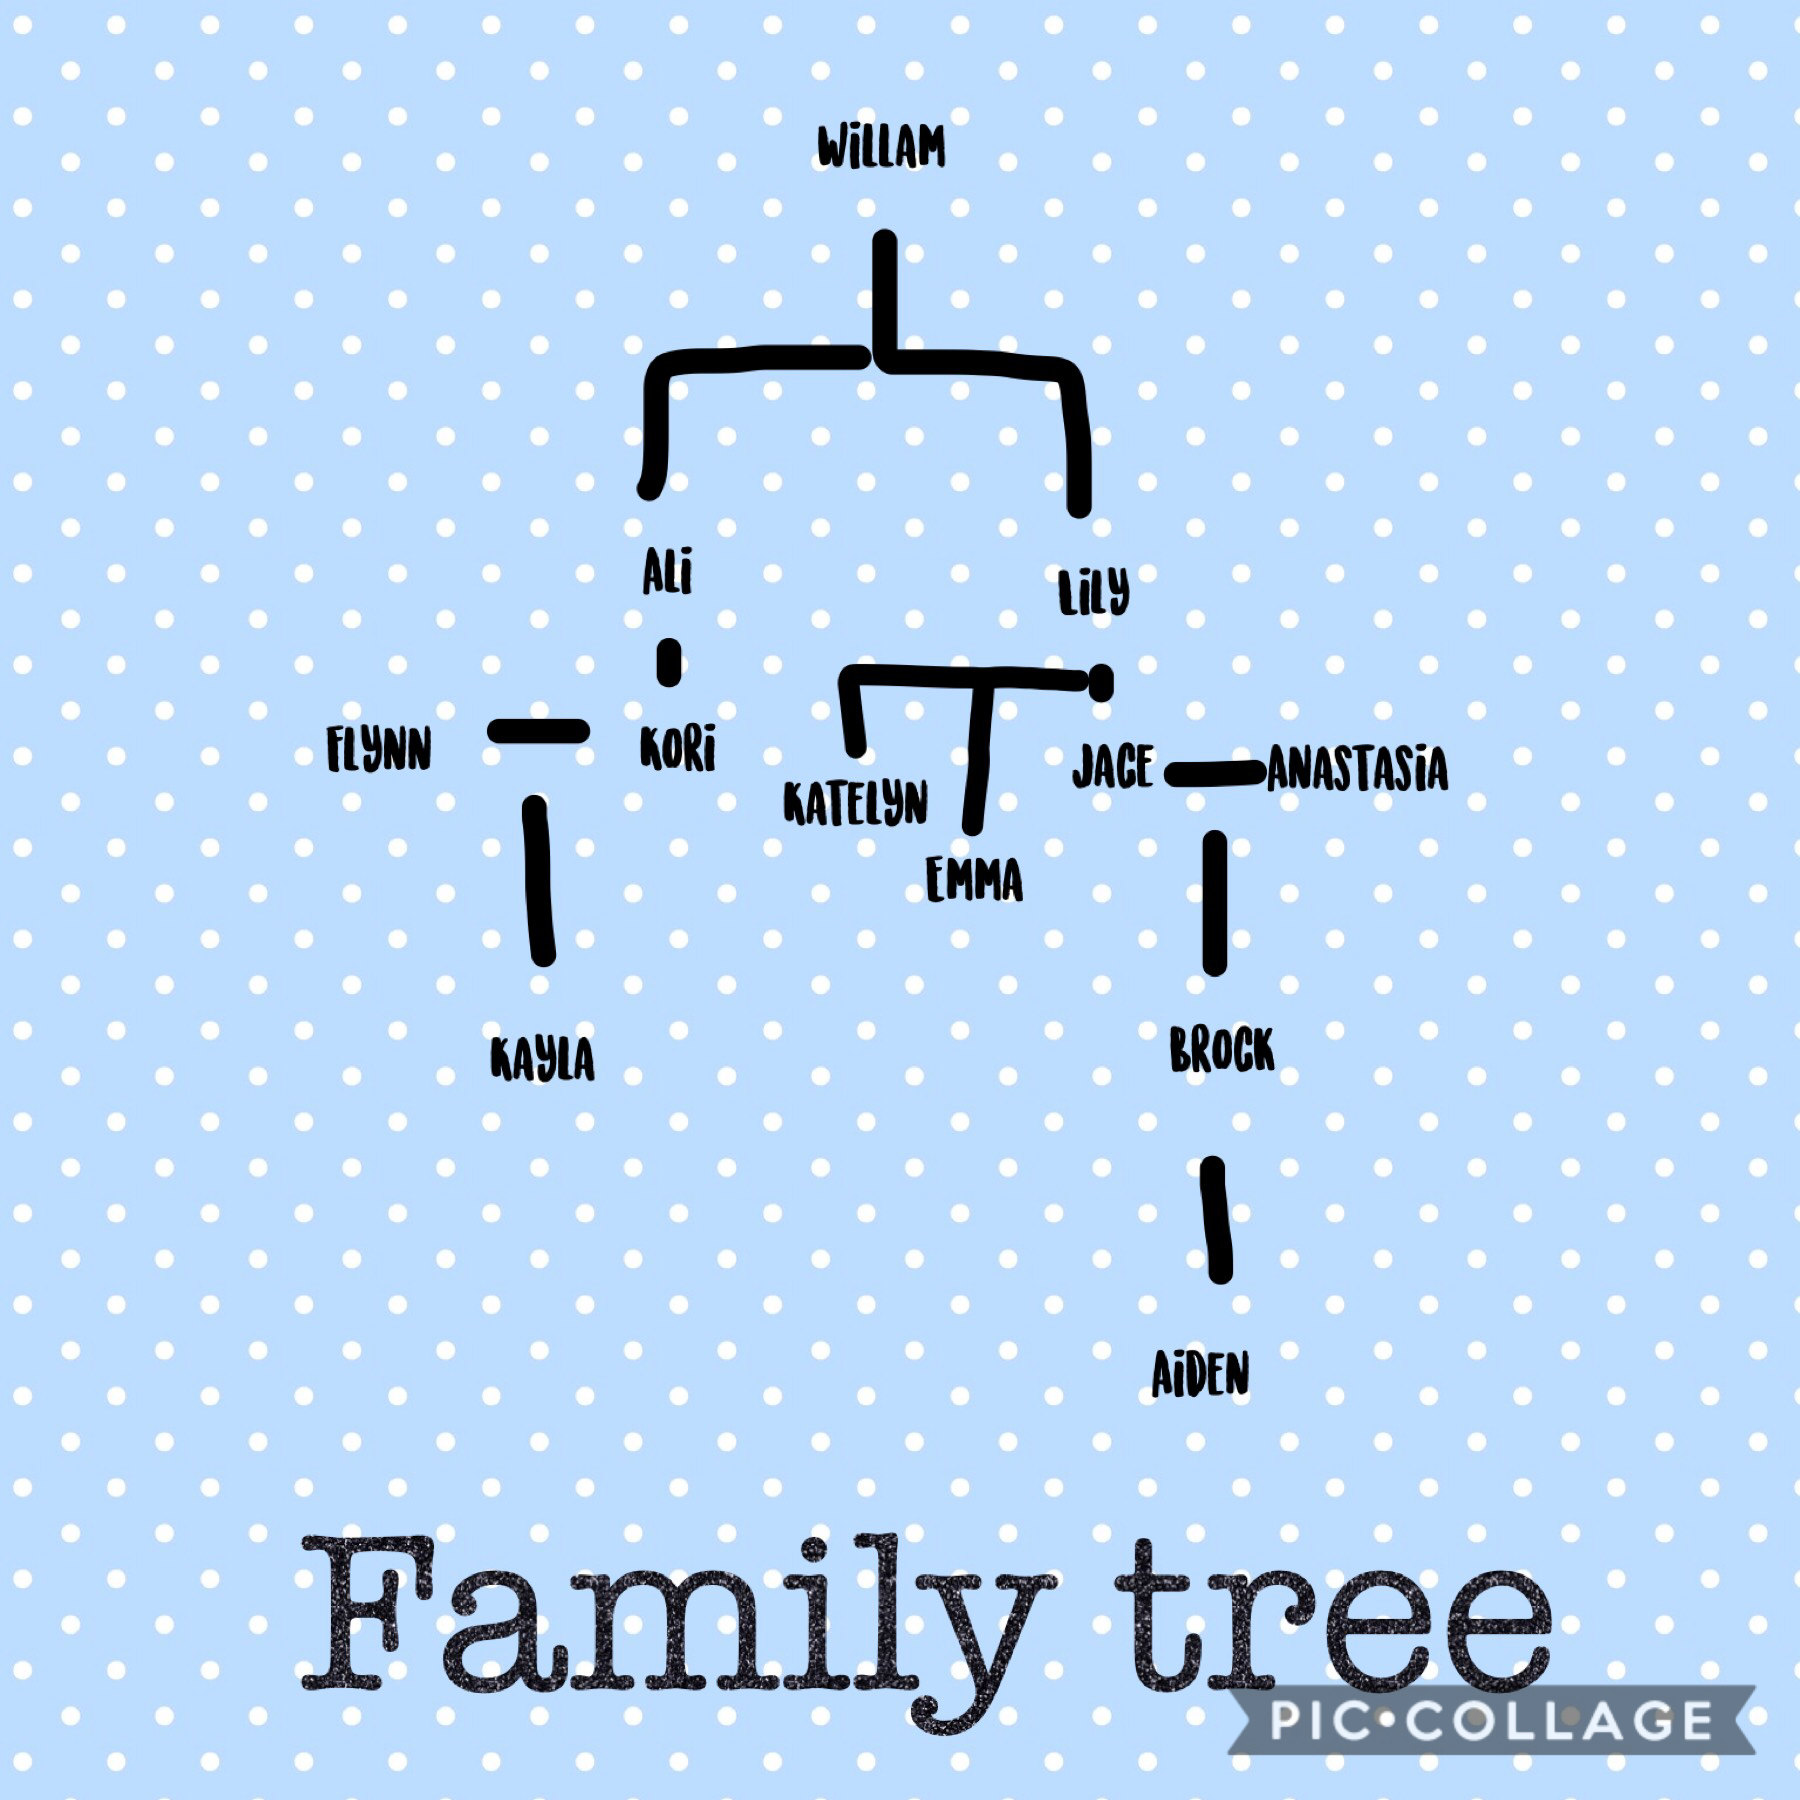 My adopted family tree my friends made